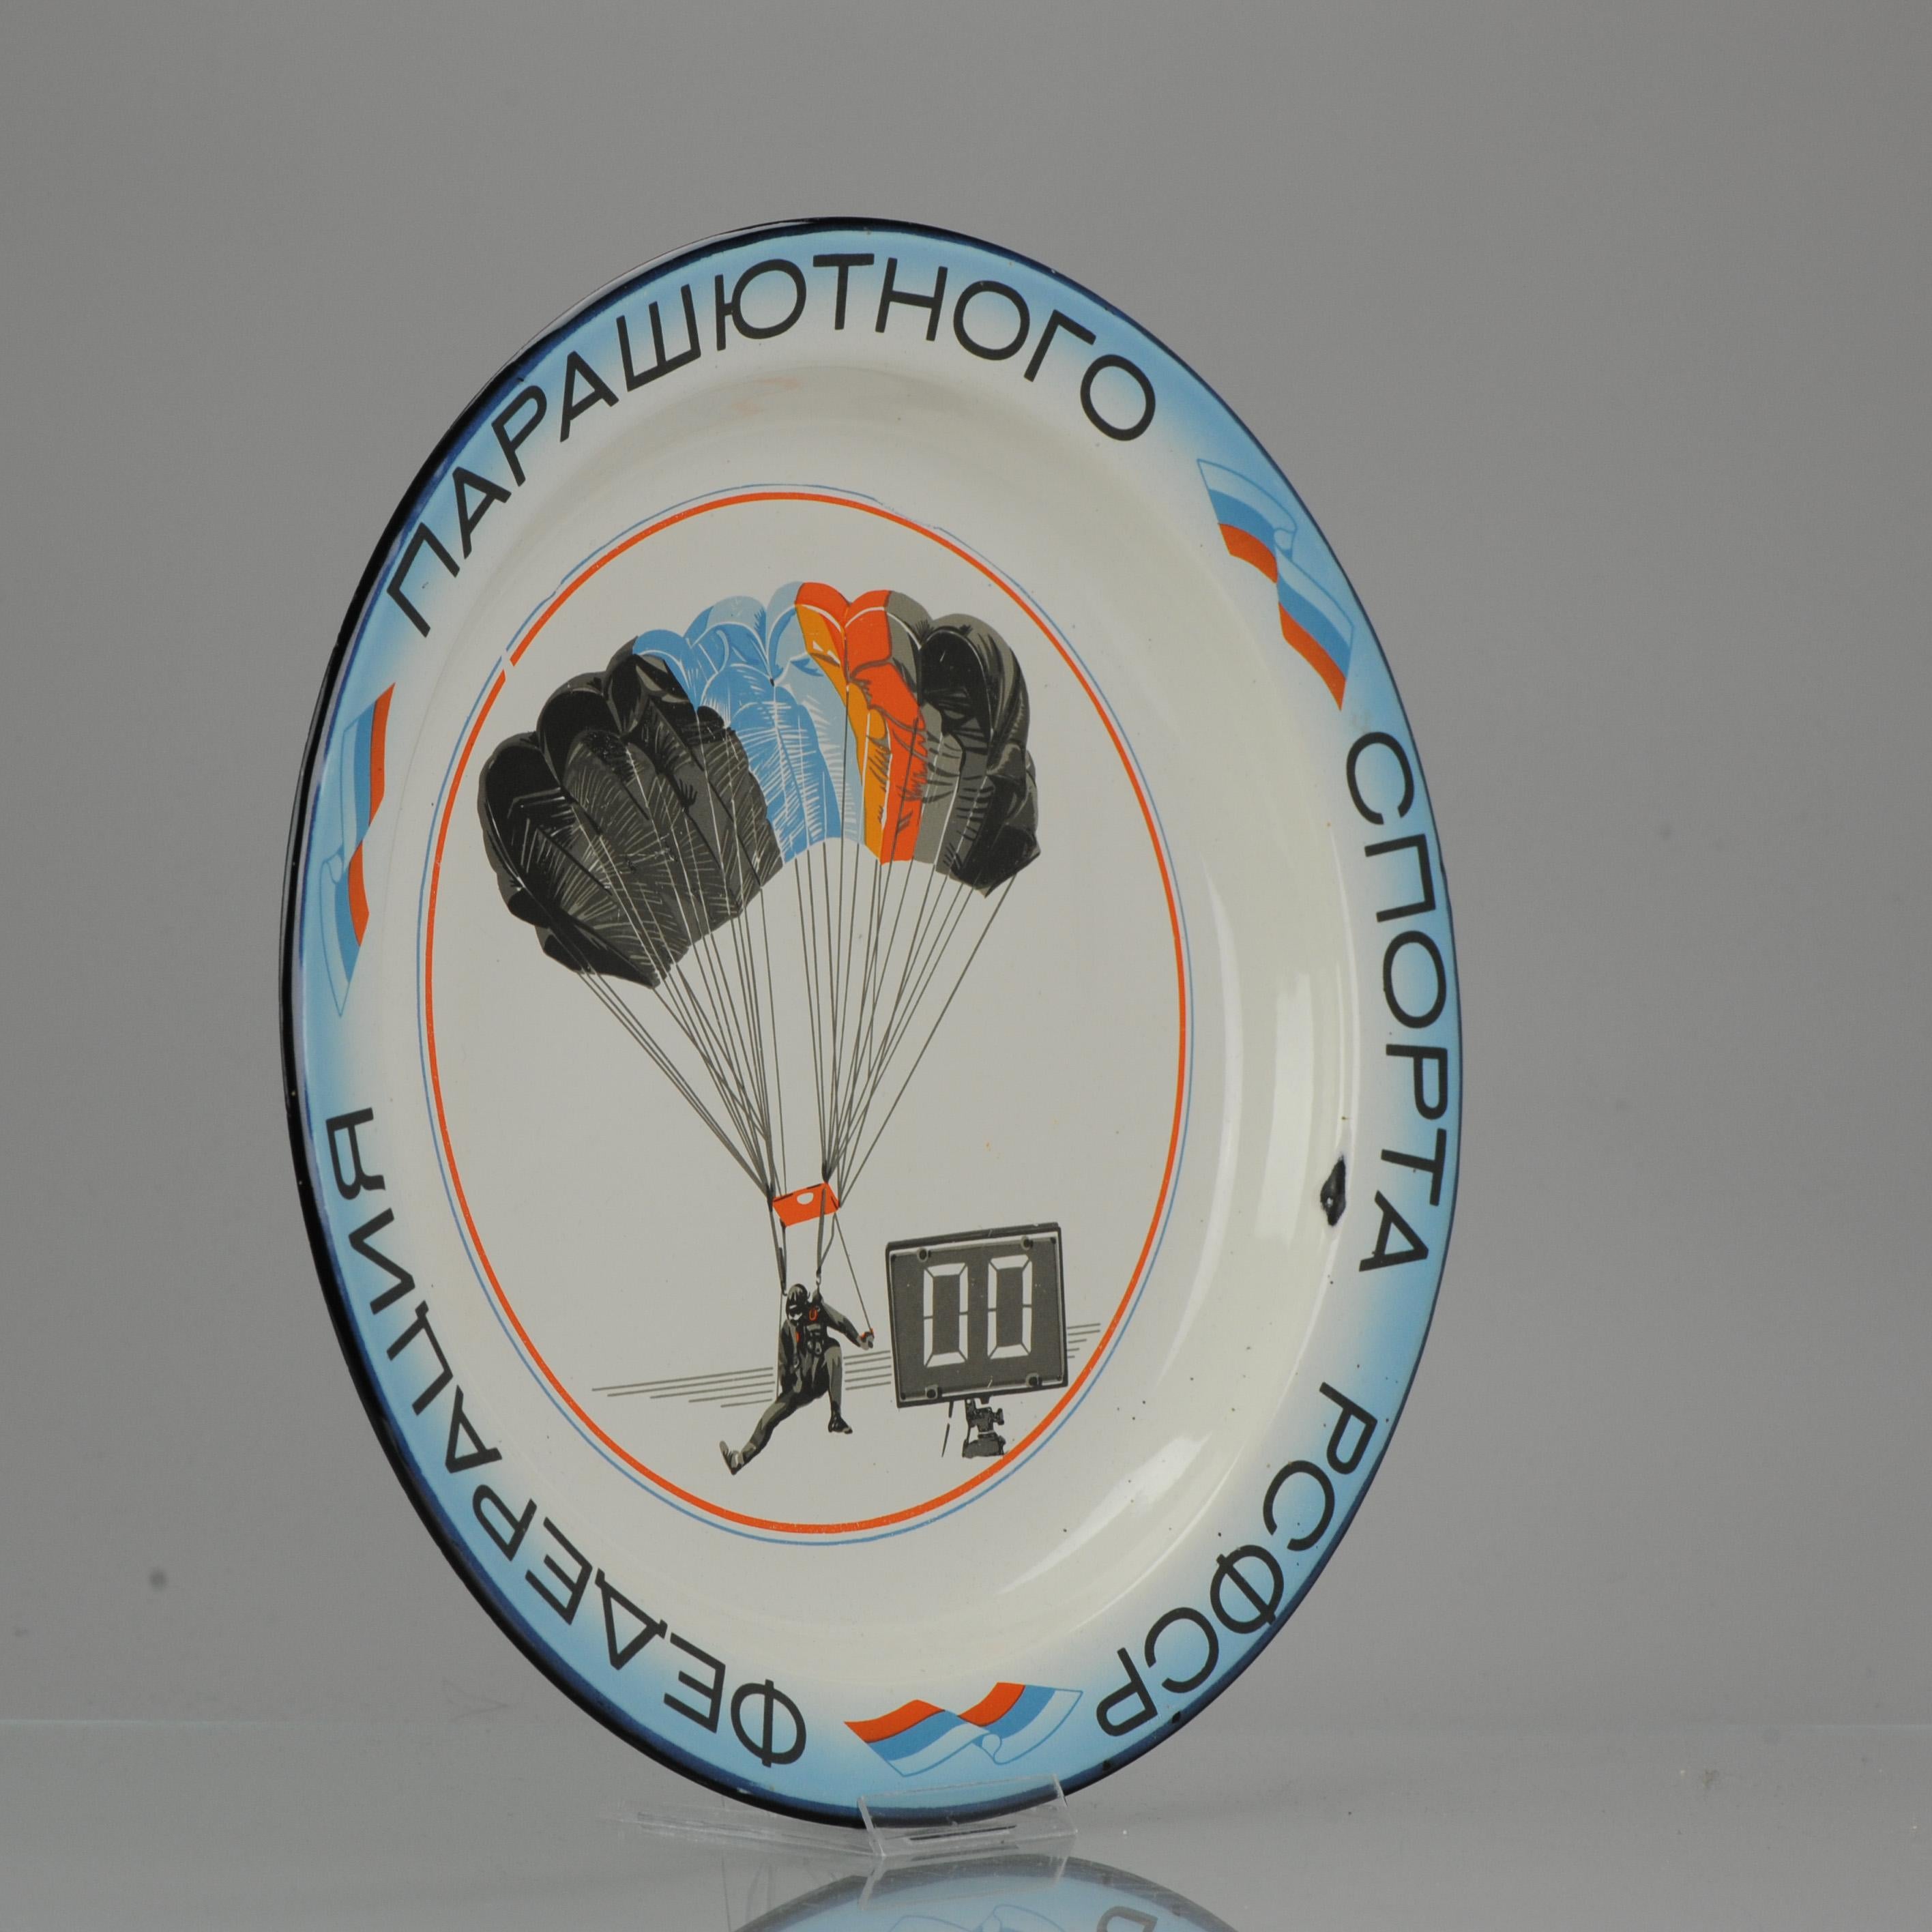 Vintage enameled plate, 1991

On the top of the plate is an image of a skydiver, and a clock or counter of some kind. There is Russian writing around the perimeter, and Russian flags. It is a commemorative plate for russian Parachute divers. On the